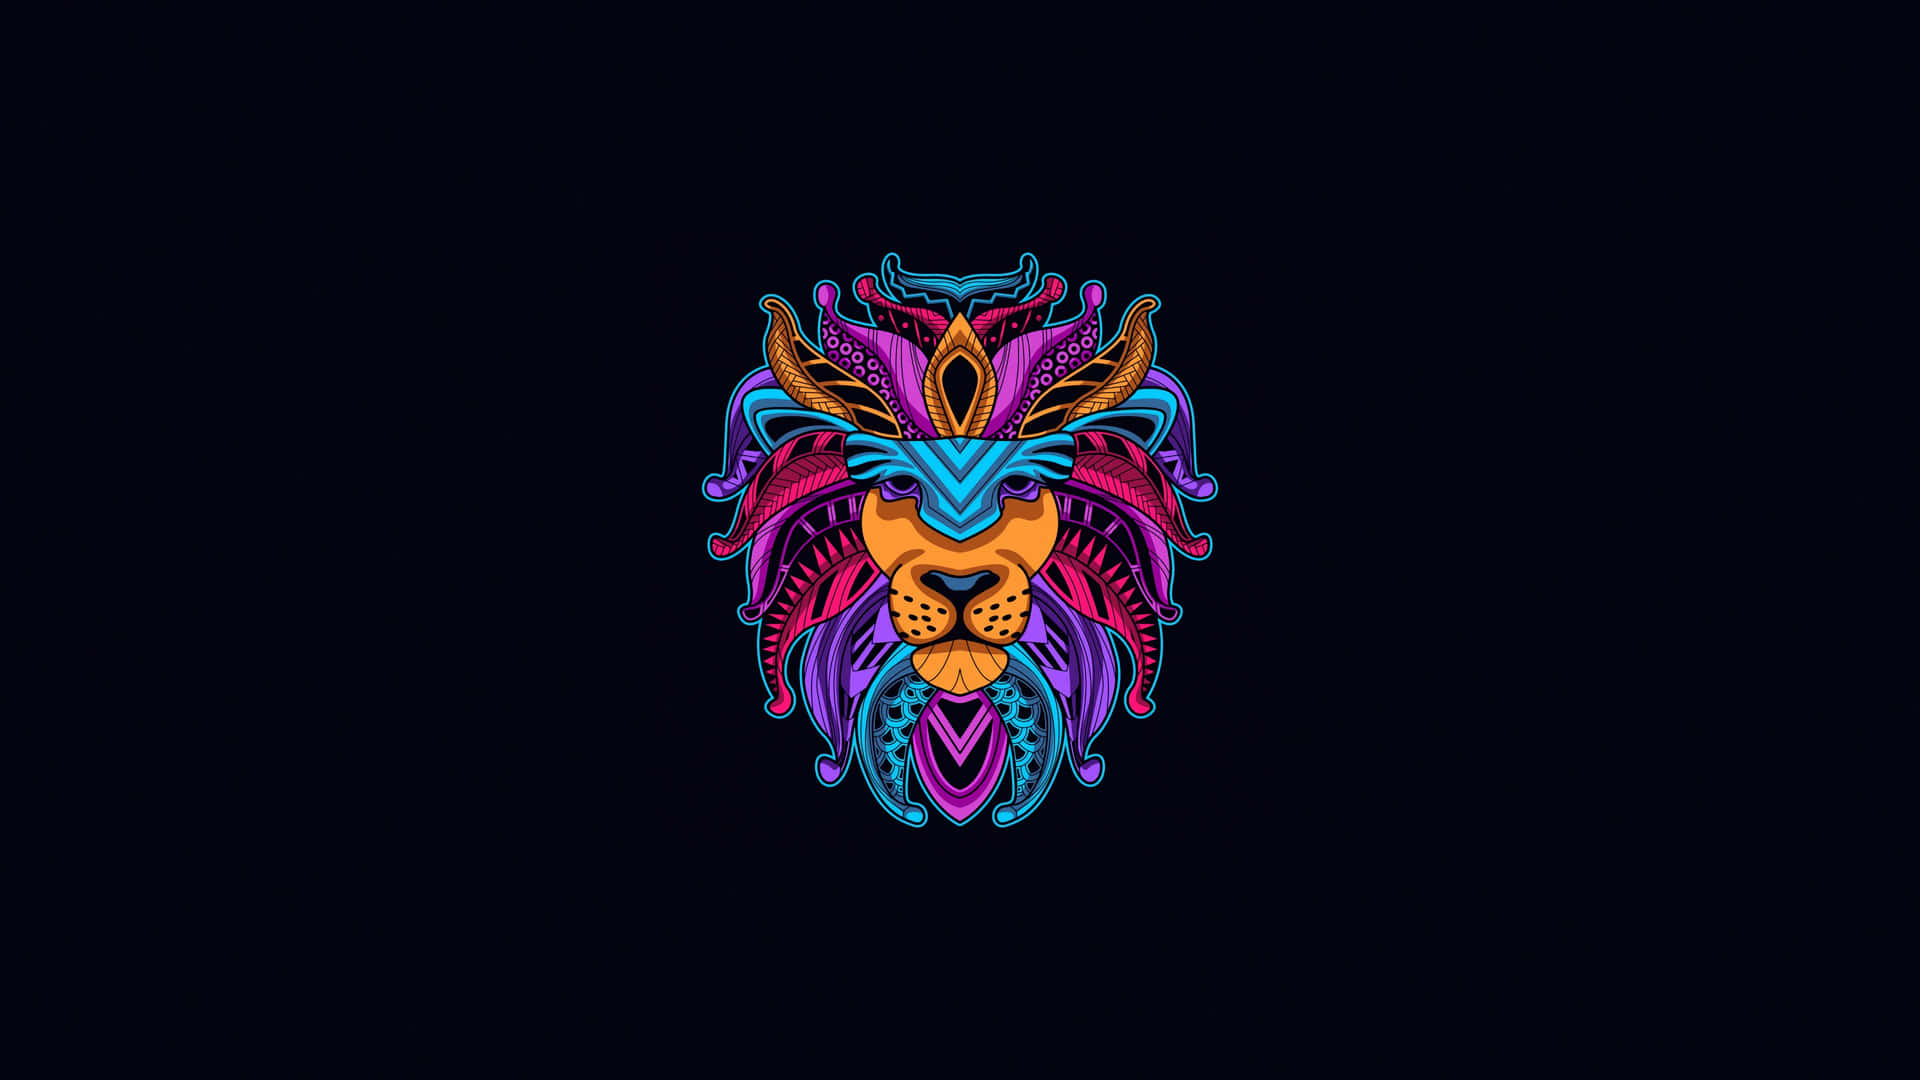 A Colorful Lion Head On A Black Background